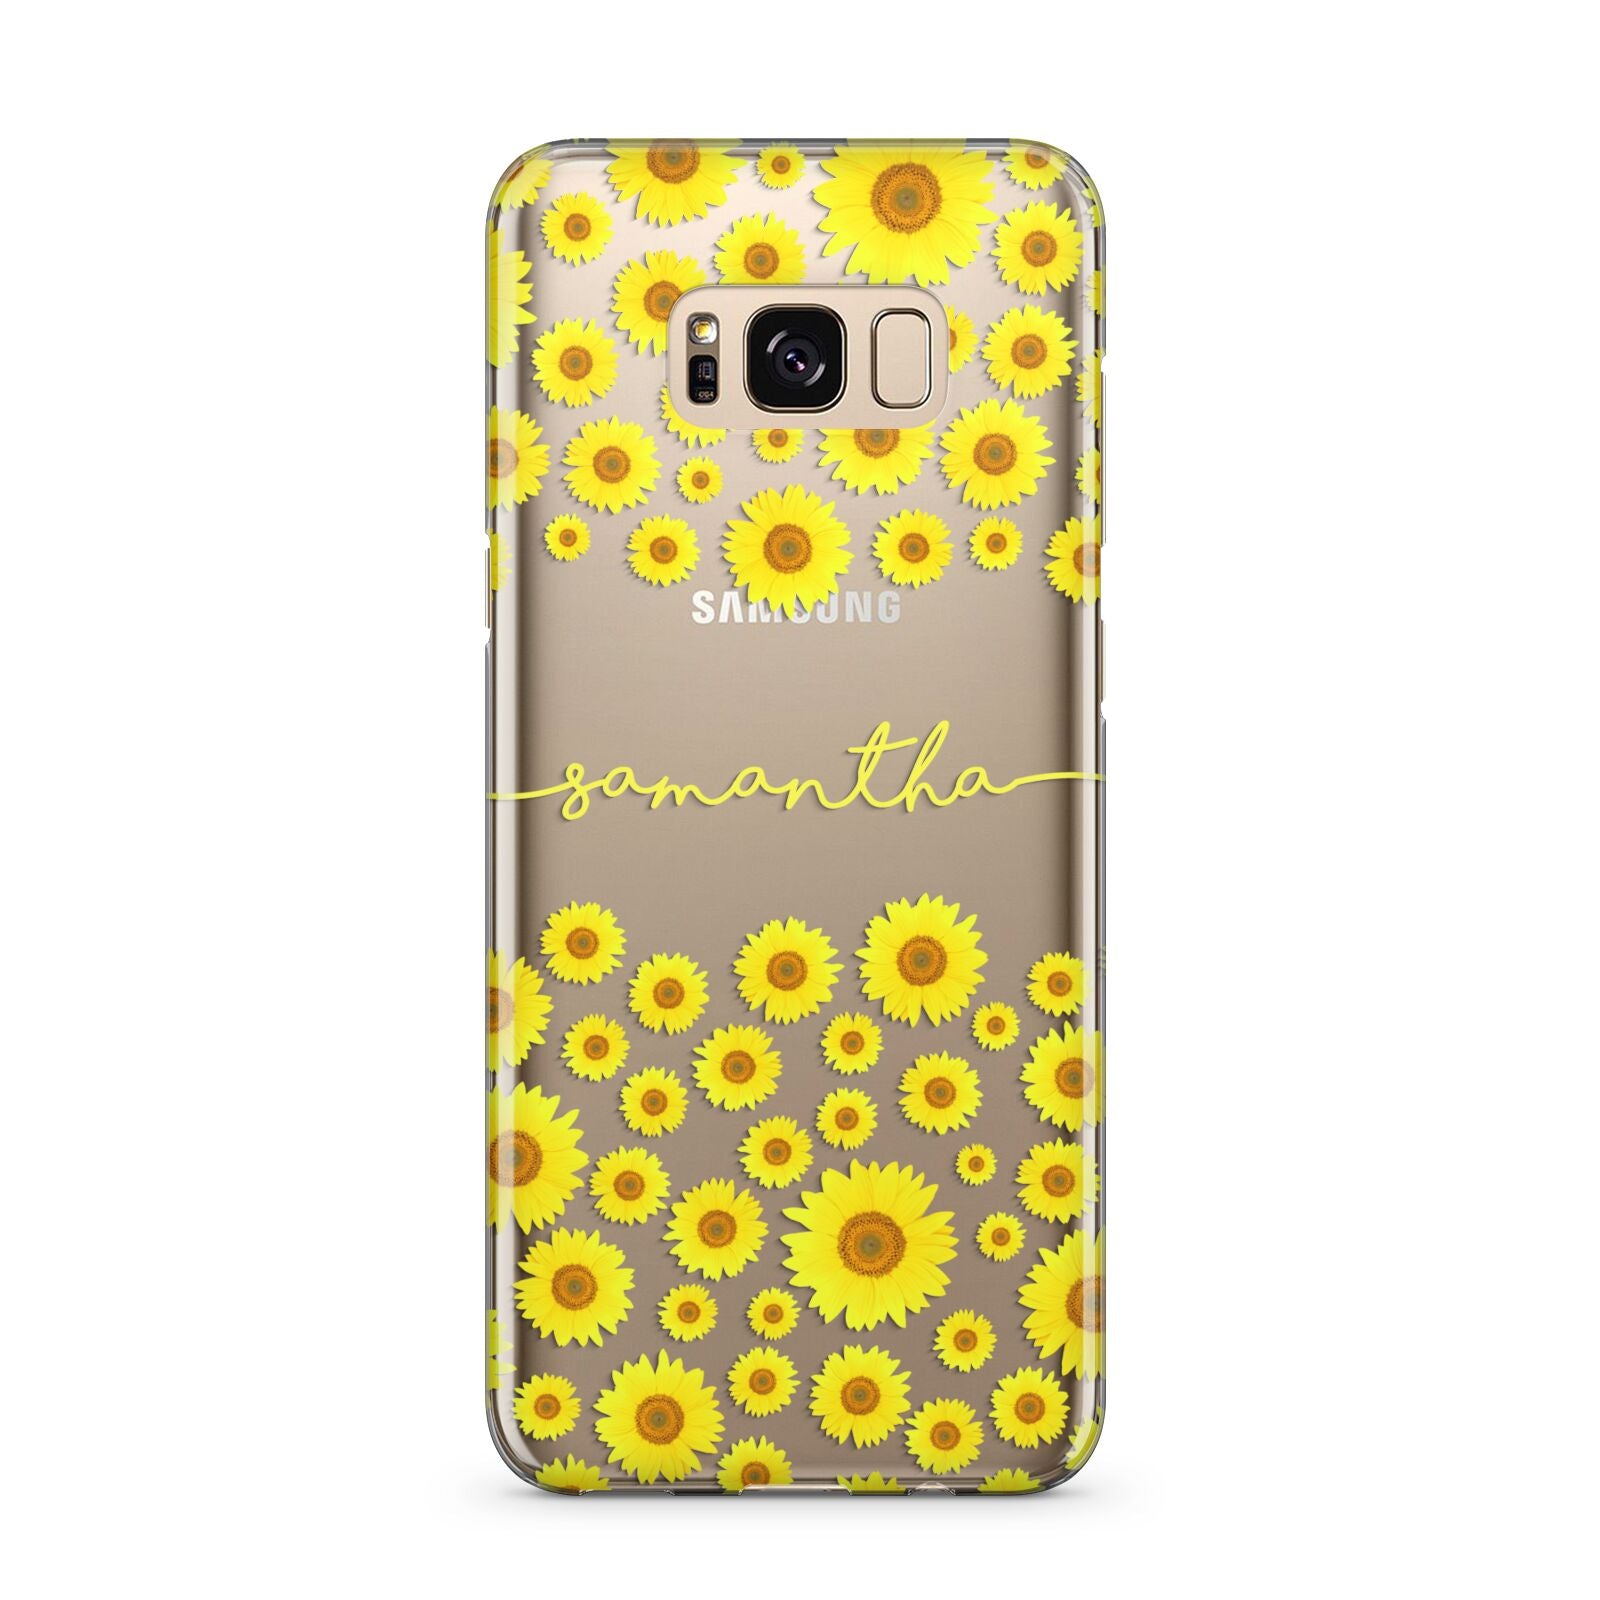 Personalised Sunflower Samsung Galaxy S8 Plus Case